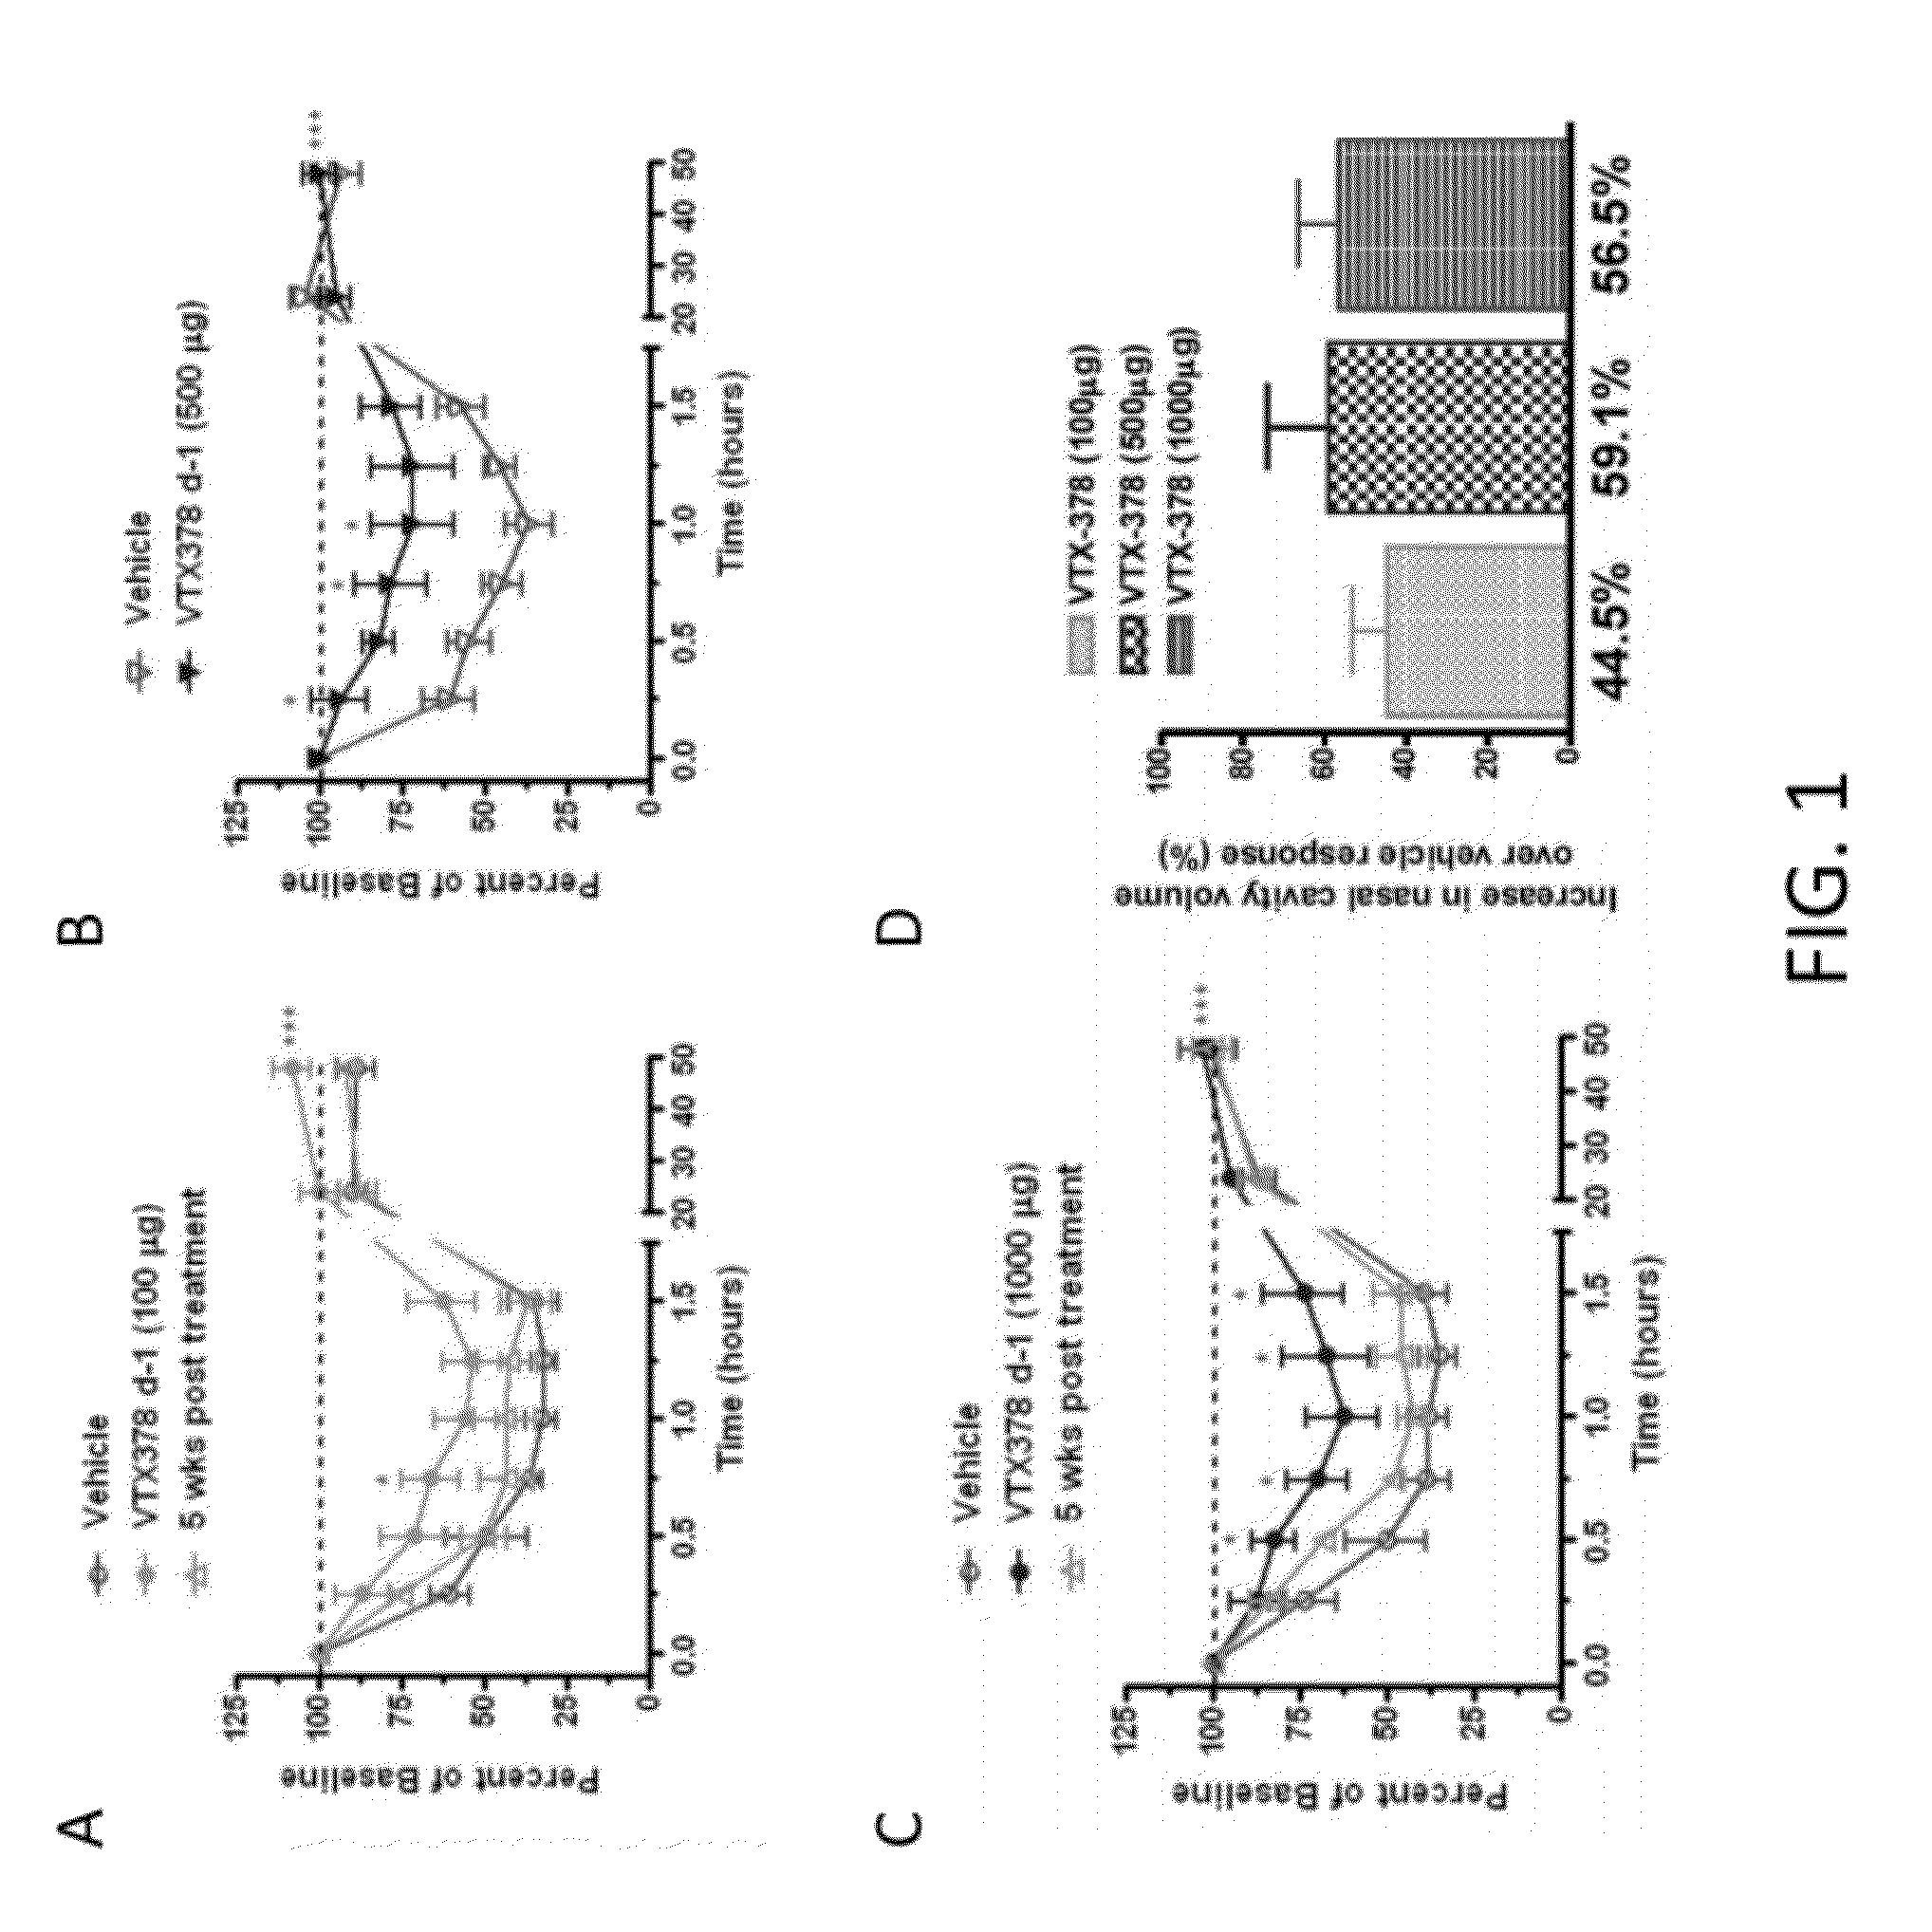 Methods for the Treatment of Allergic Diseases